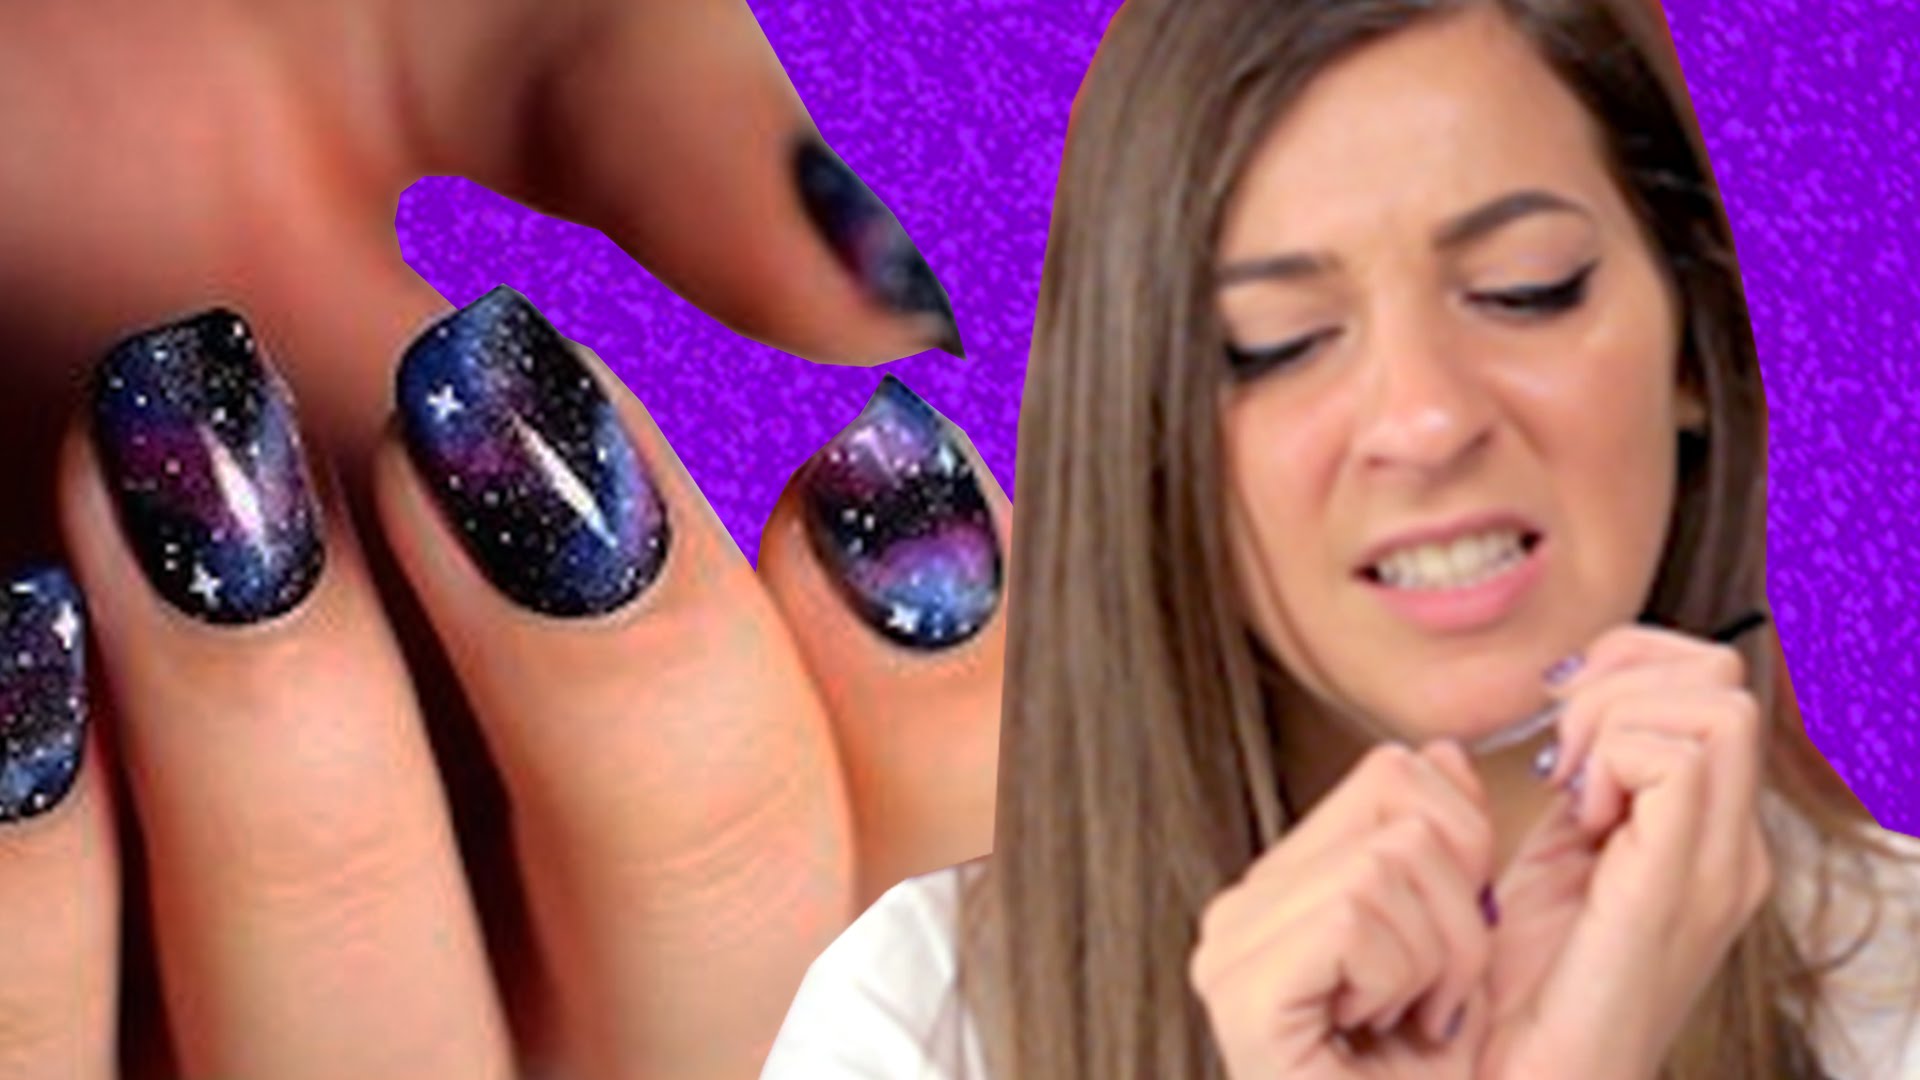 The Ugly Beauty Of Nail Art | HuffPost Entertainment